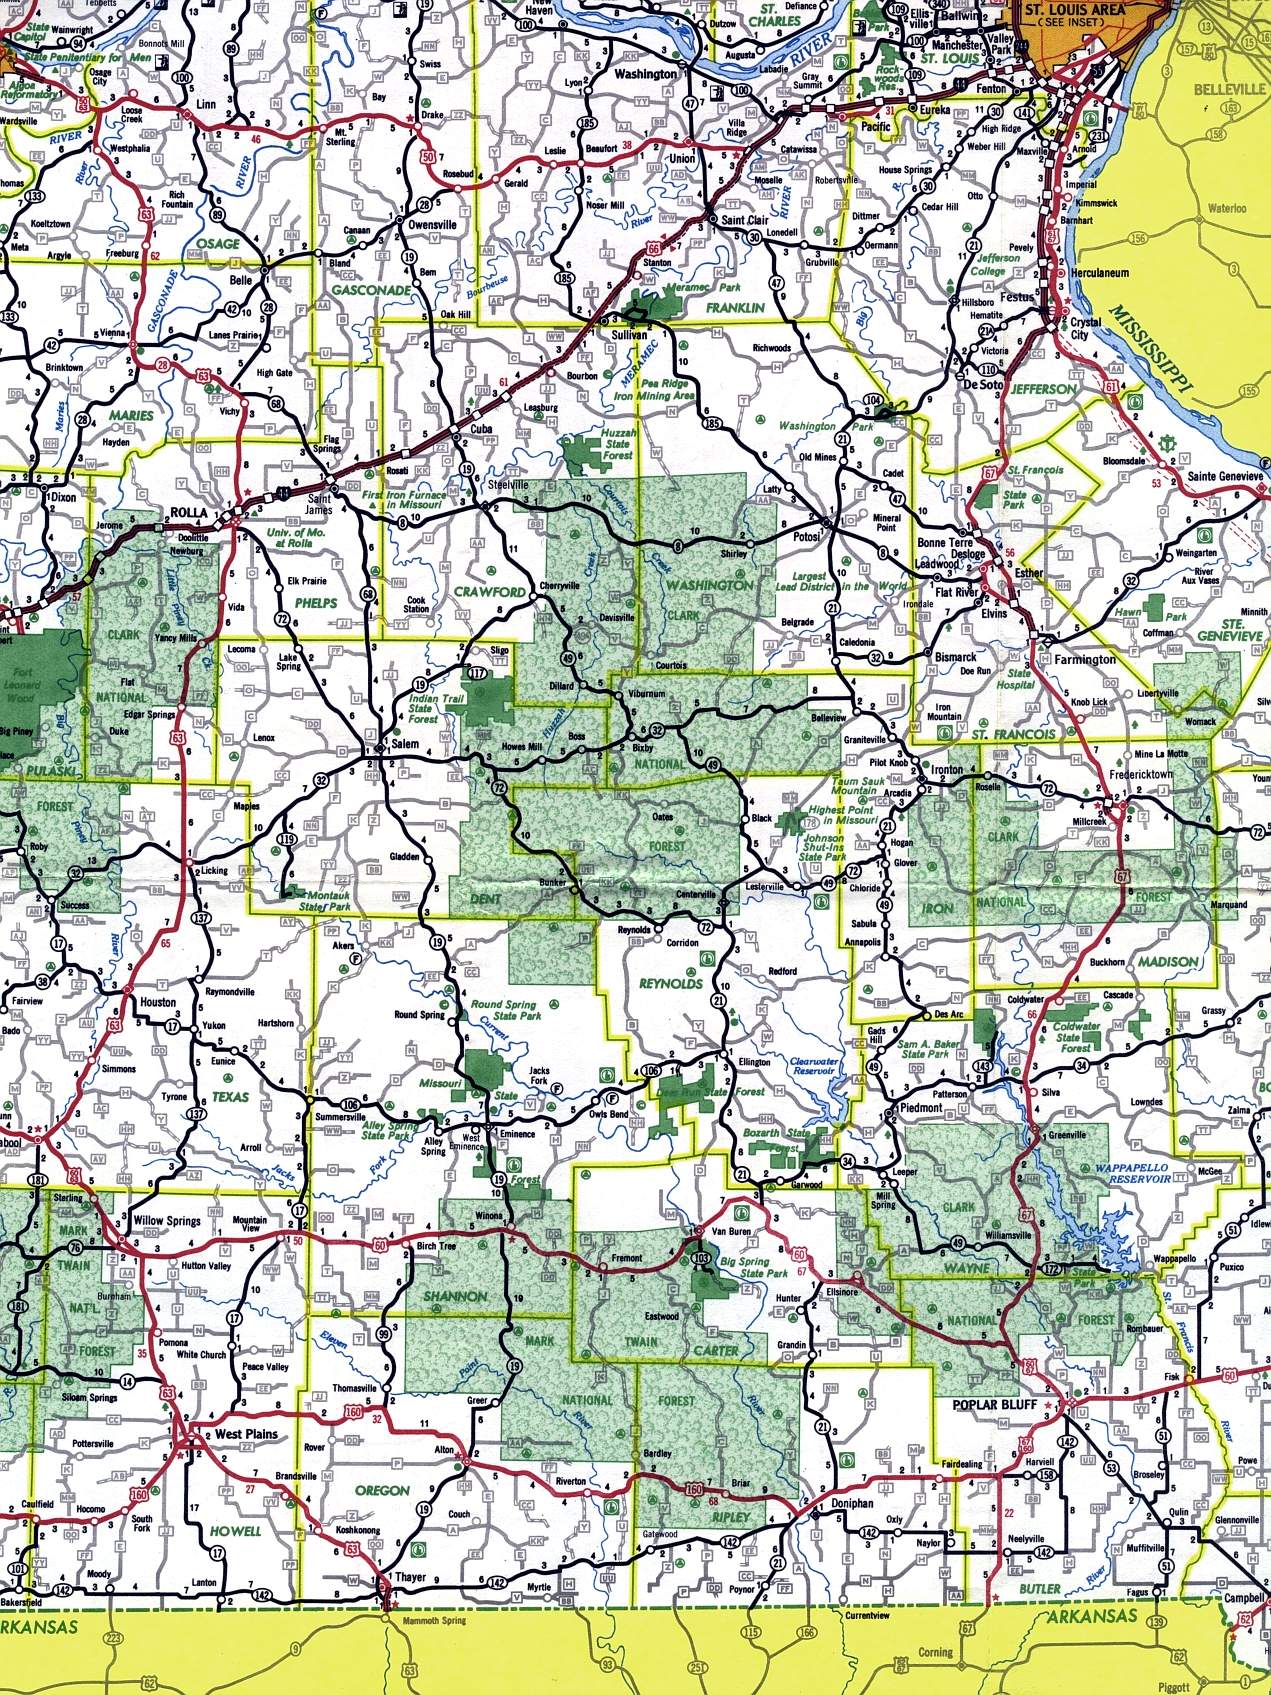 Southeast-central section of Missouri from 1969 official highway map